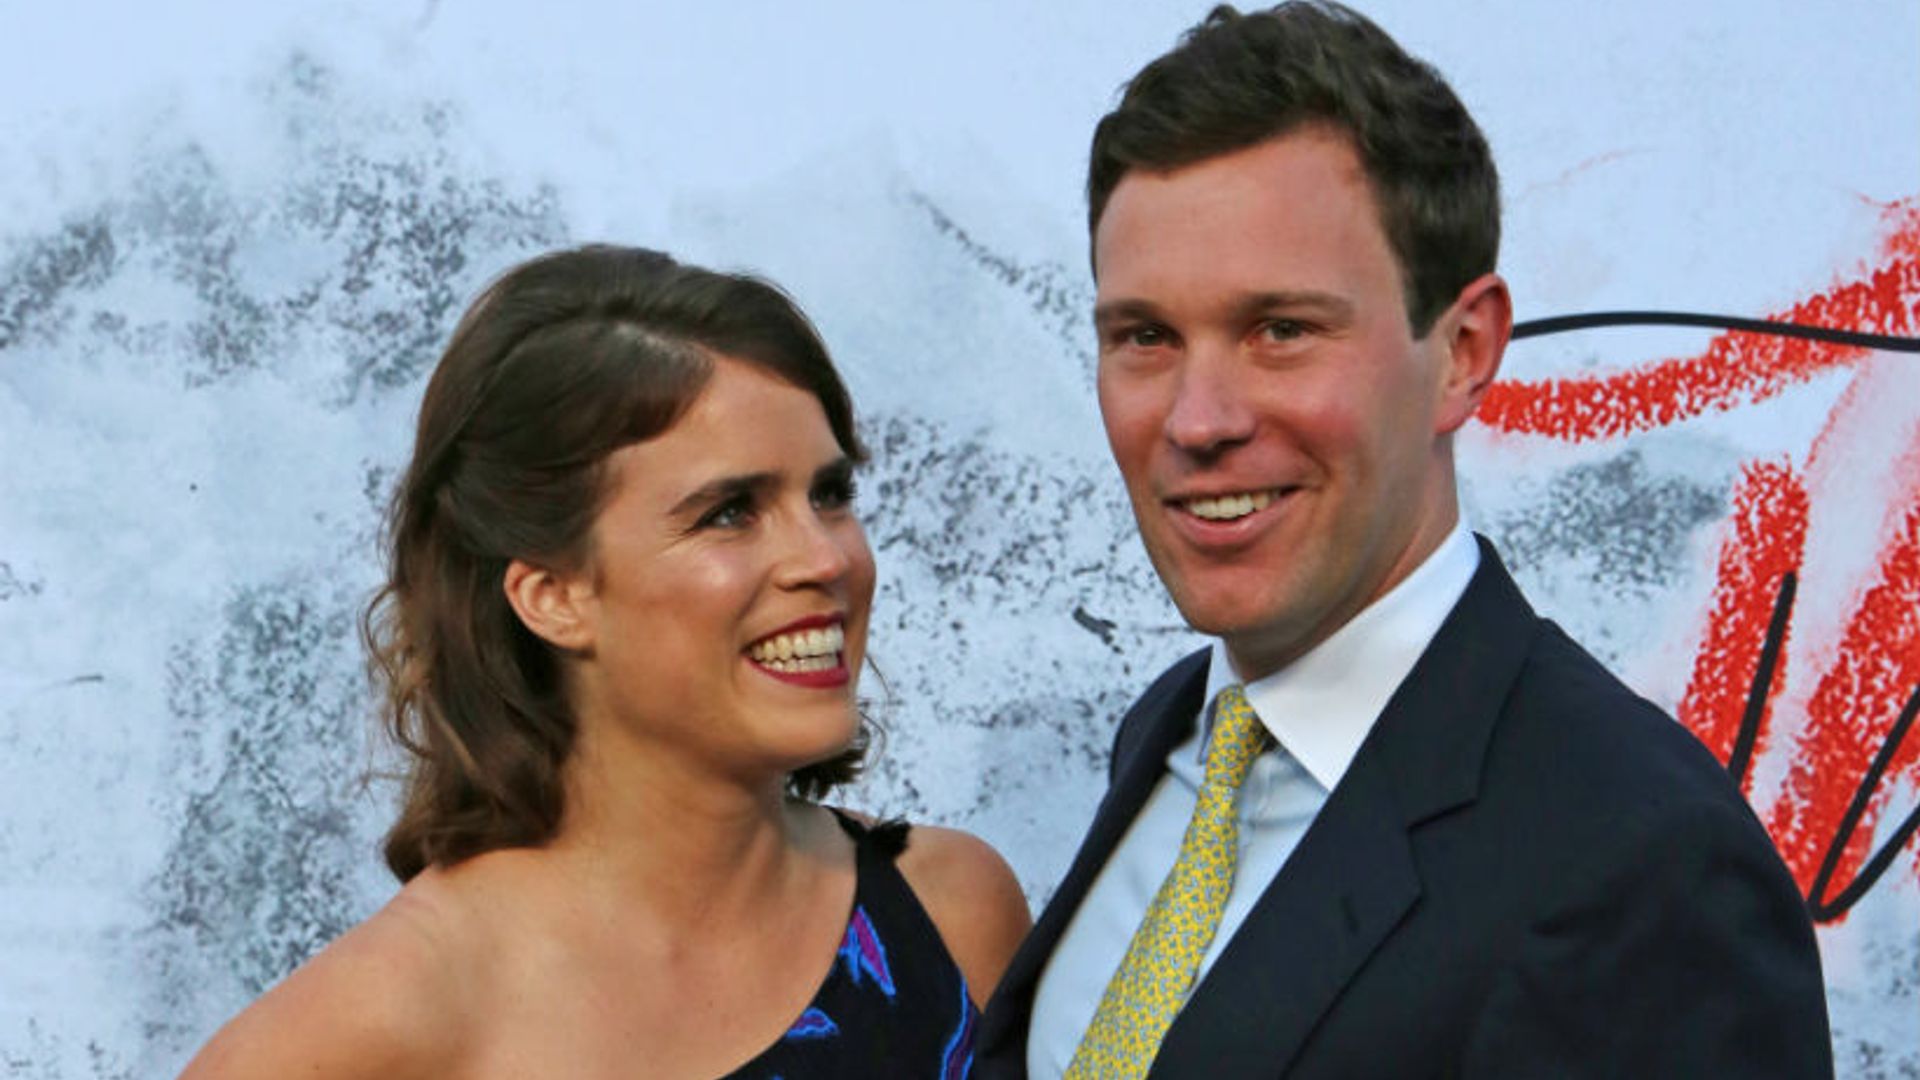 Princess Eugenie opens up about stress of planning a 'nerve-wracking' royal wedding